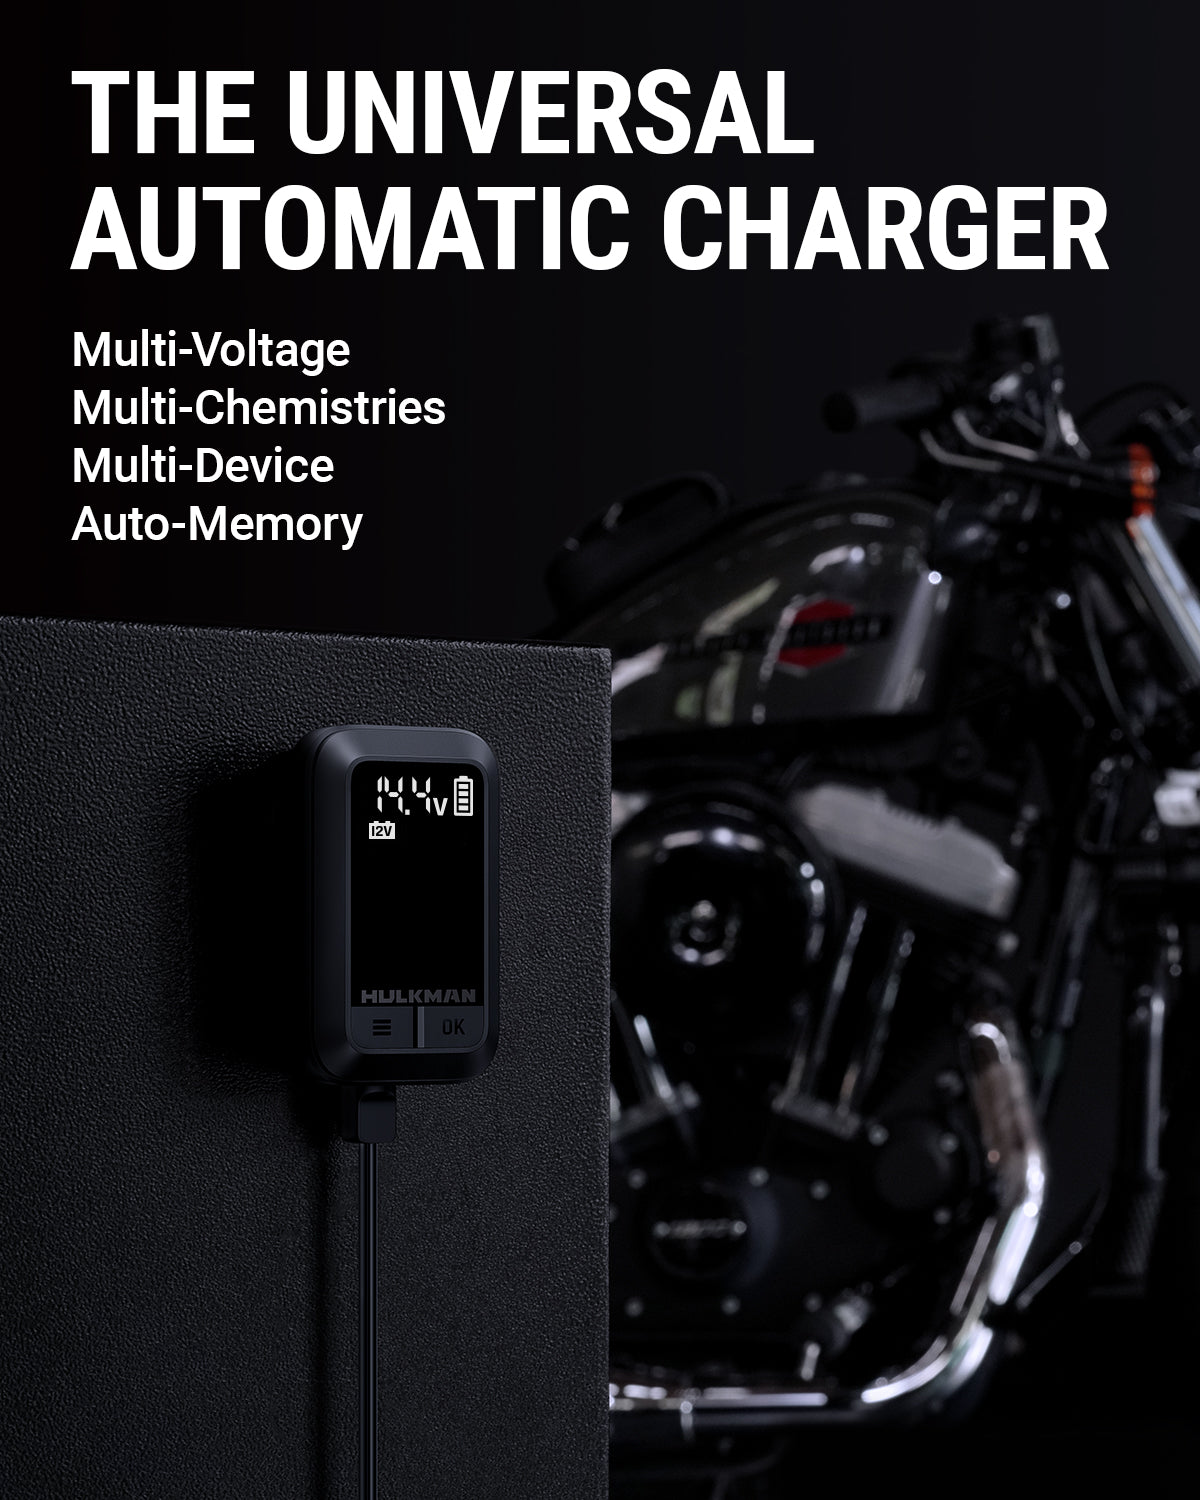 No Dead Car Battery: Hulkman Sigma 5 Amp Battery Charger